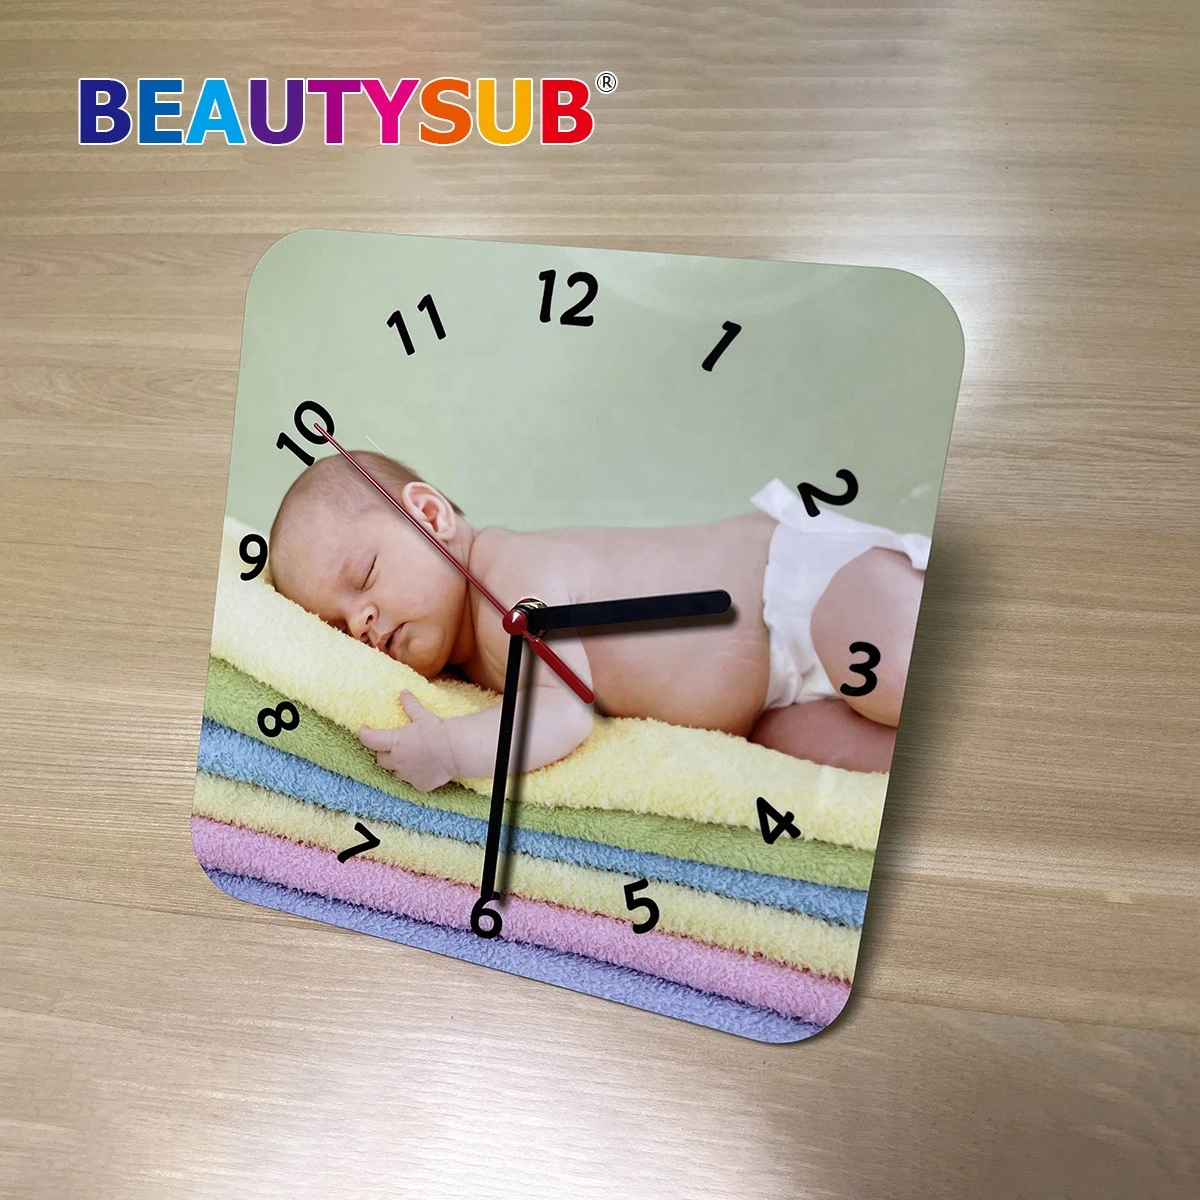 LS-CC008 HD sublimation Aluminum Clock dye sublimation metal clocks gloss white blanks with movement for heat transfer printing